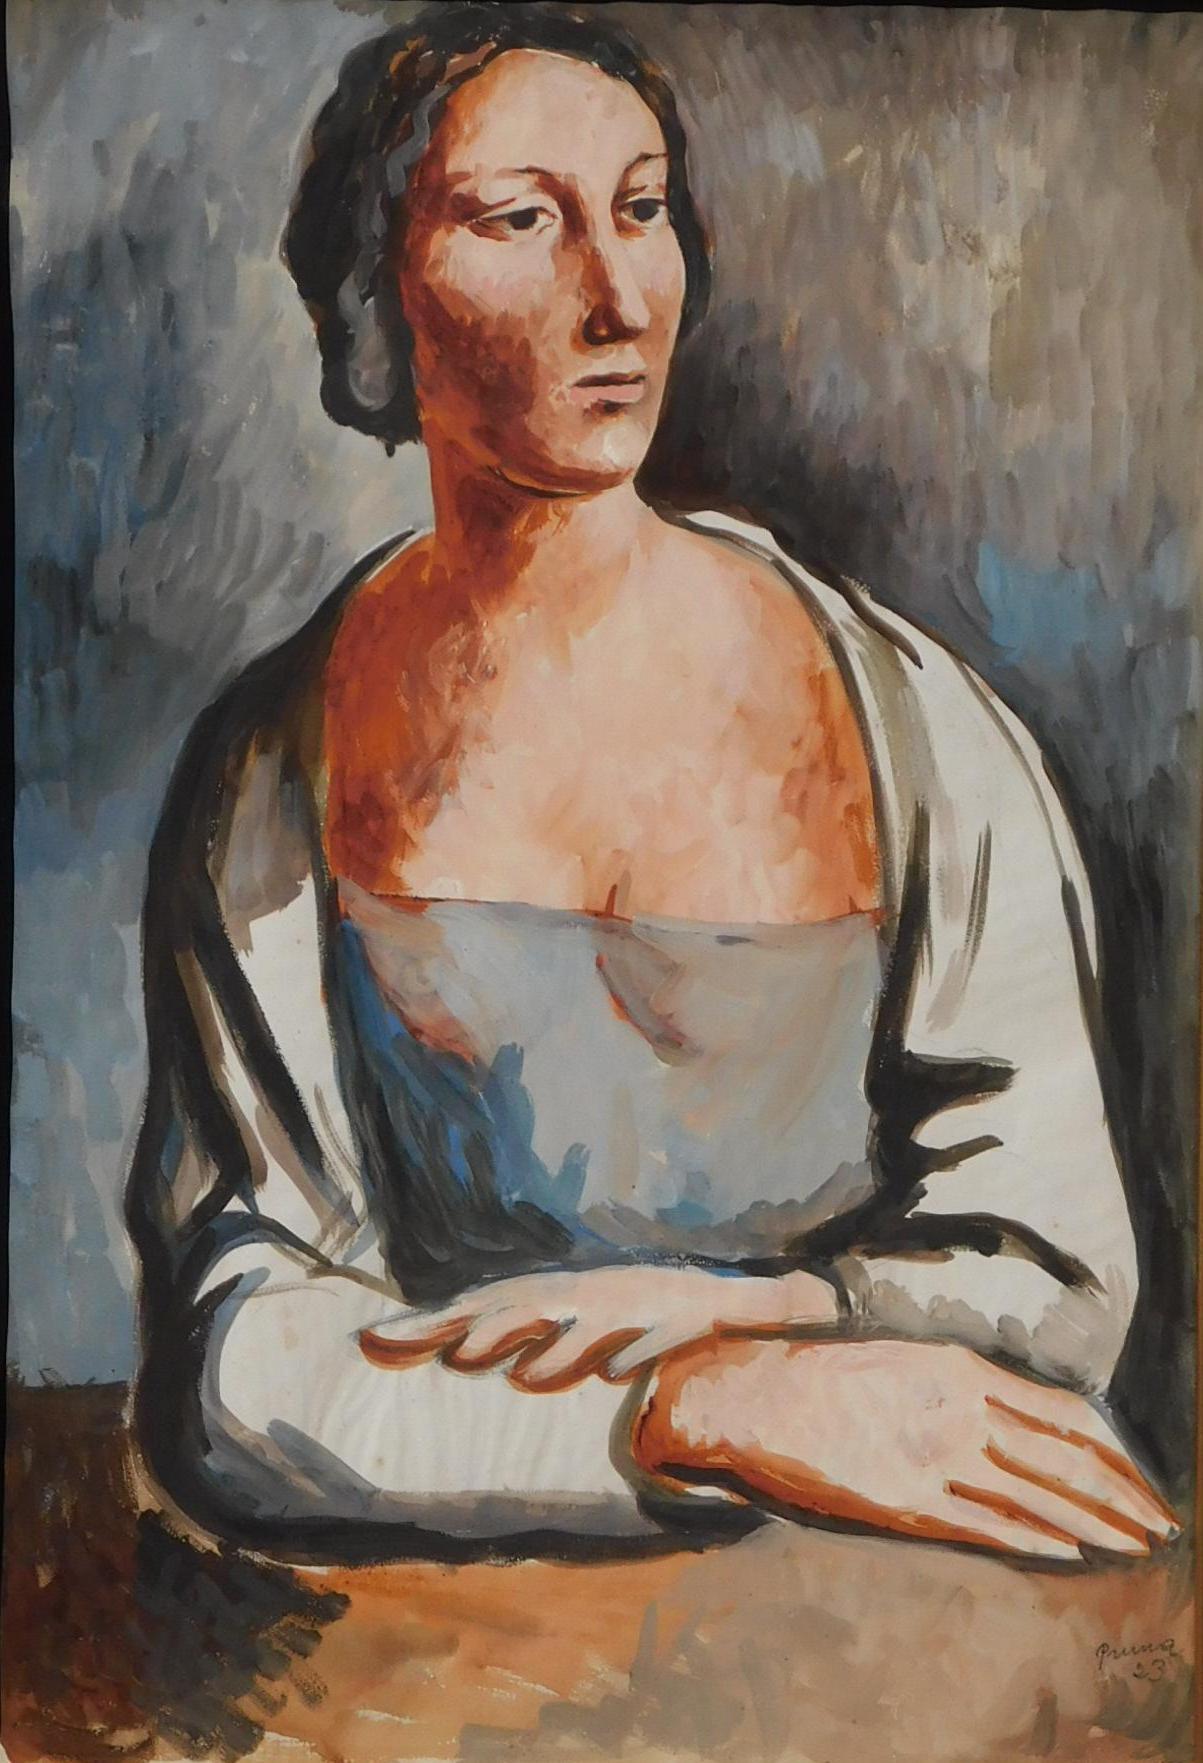 A beautiful work by Spanish painter Pedro Pruna y Ocerans (1904-1977).
The painting and frame are in excellent condition.

Title: “Femme Assise” 
Medium: Gouache
Date: 1923
Size: 25